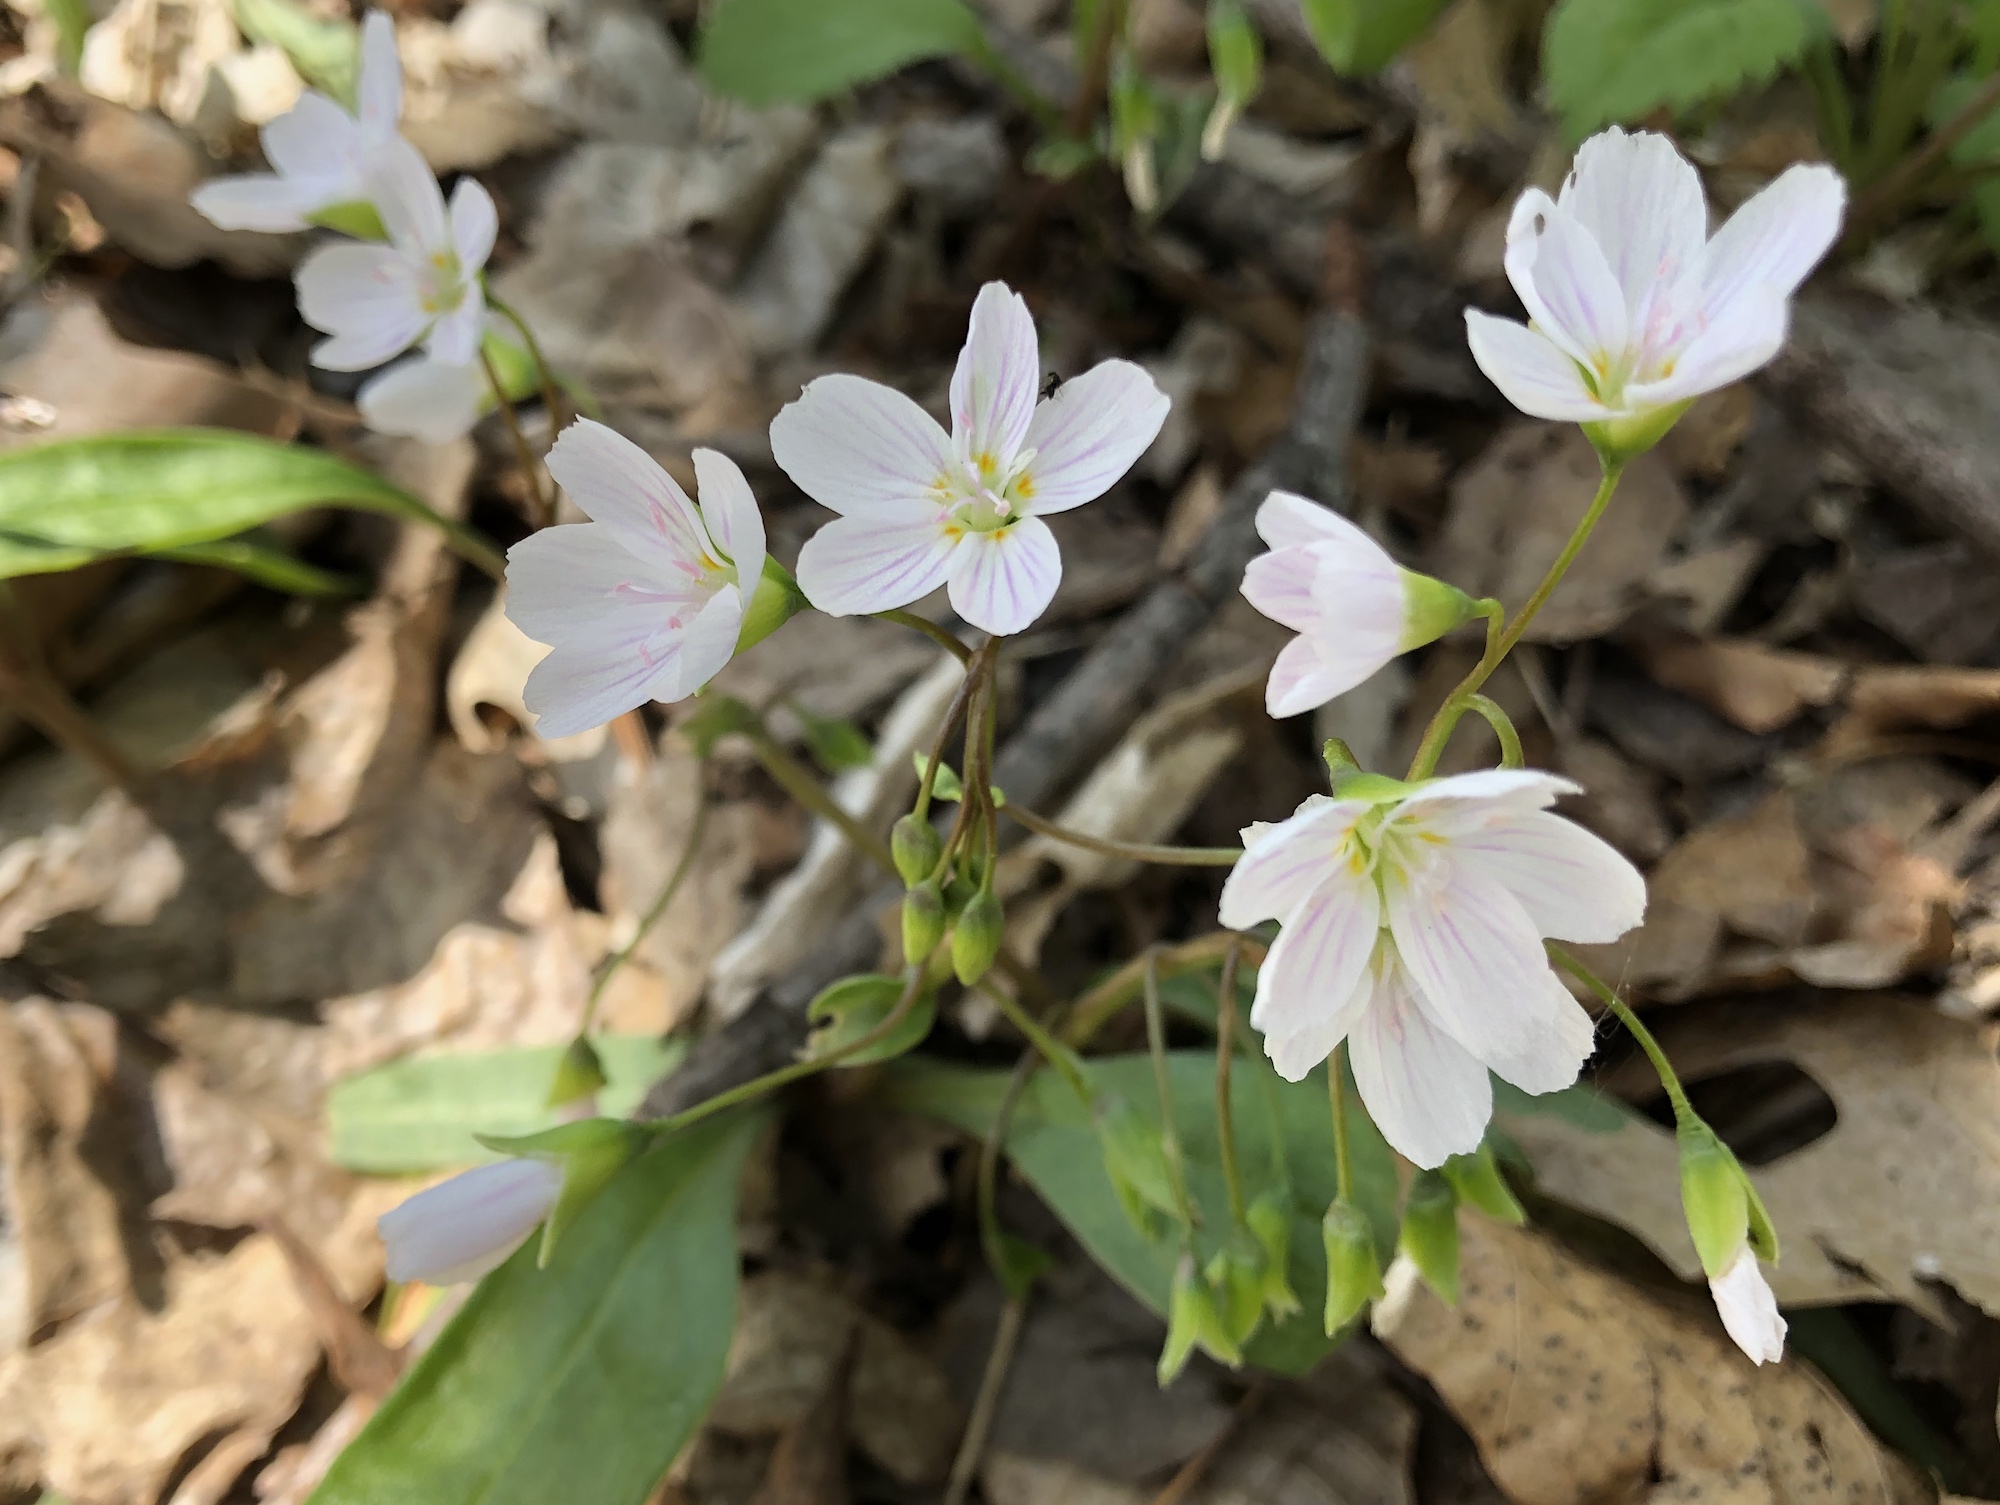 Springbeauty in the Maple-Basswood Forest of the University of Wisconsin Arboretum in Madison, Wisconsin on May 6, 2020.